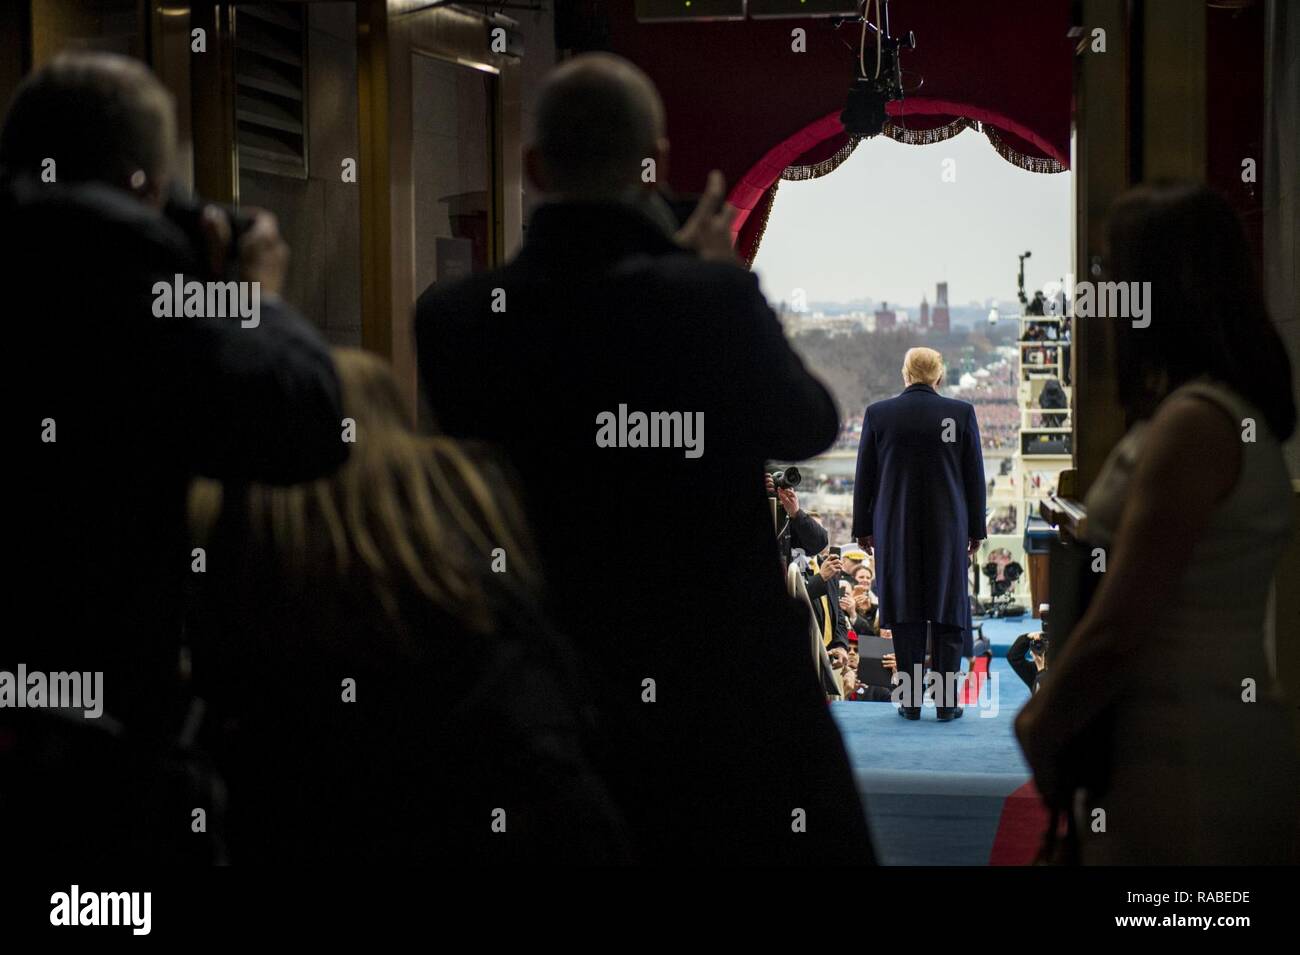 President-elect Donald J. Trump stands on the platform of the Capitol during the 58th Presidential Inauguration in Washington, D.C., Jan. 20, 2017. More than 5,000 military members from across all branches of the armed forces of the United States, including reserve and National Guard components, provided ceremonial support and Defense Support of Civil Authorities during the inaugural period. Stock Photo